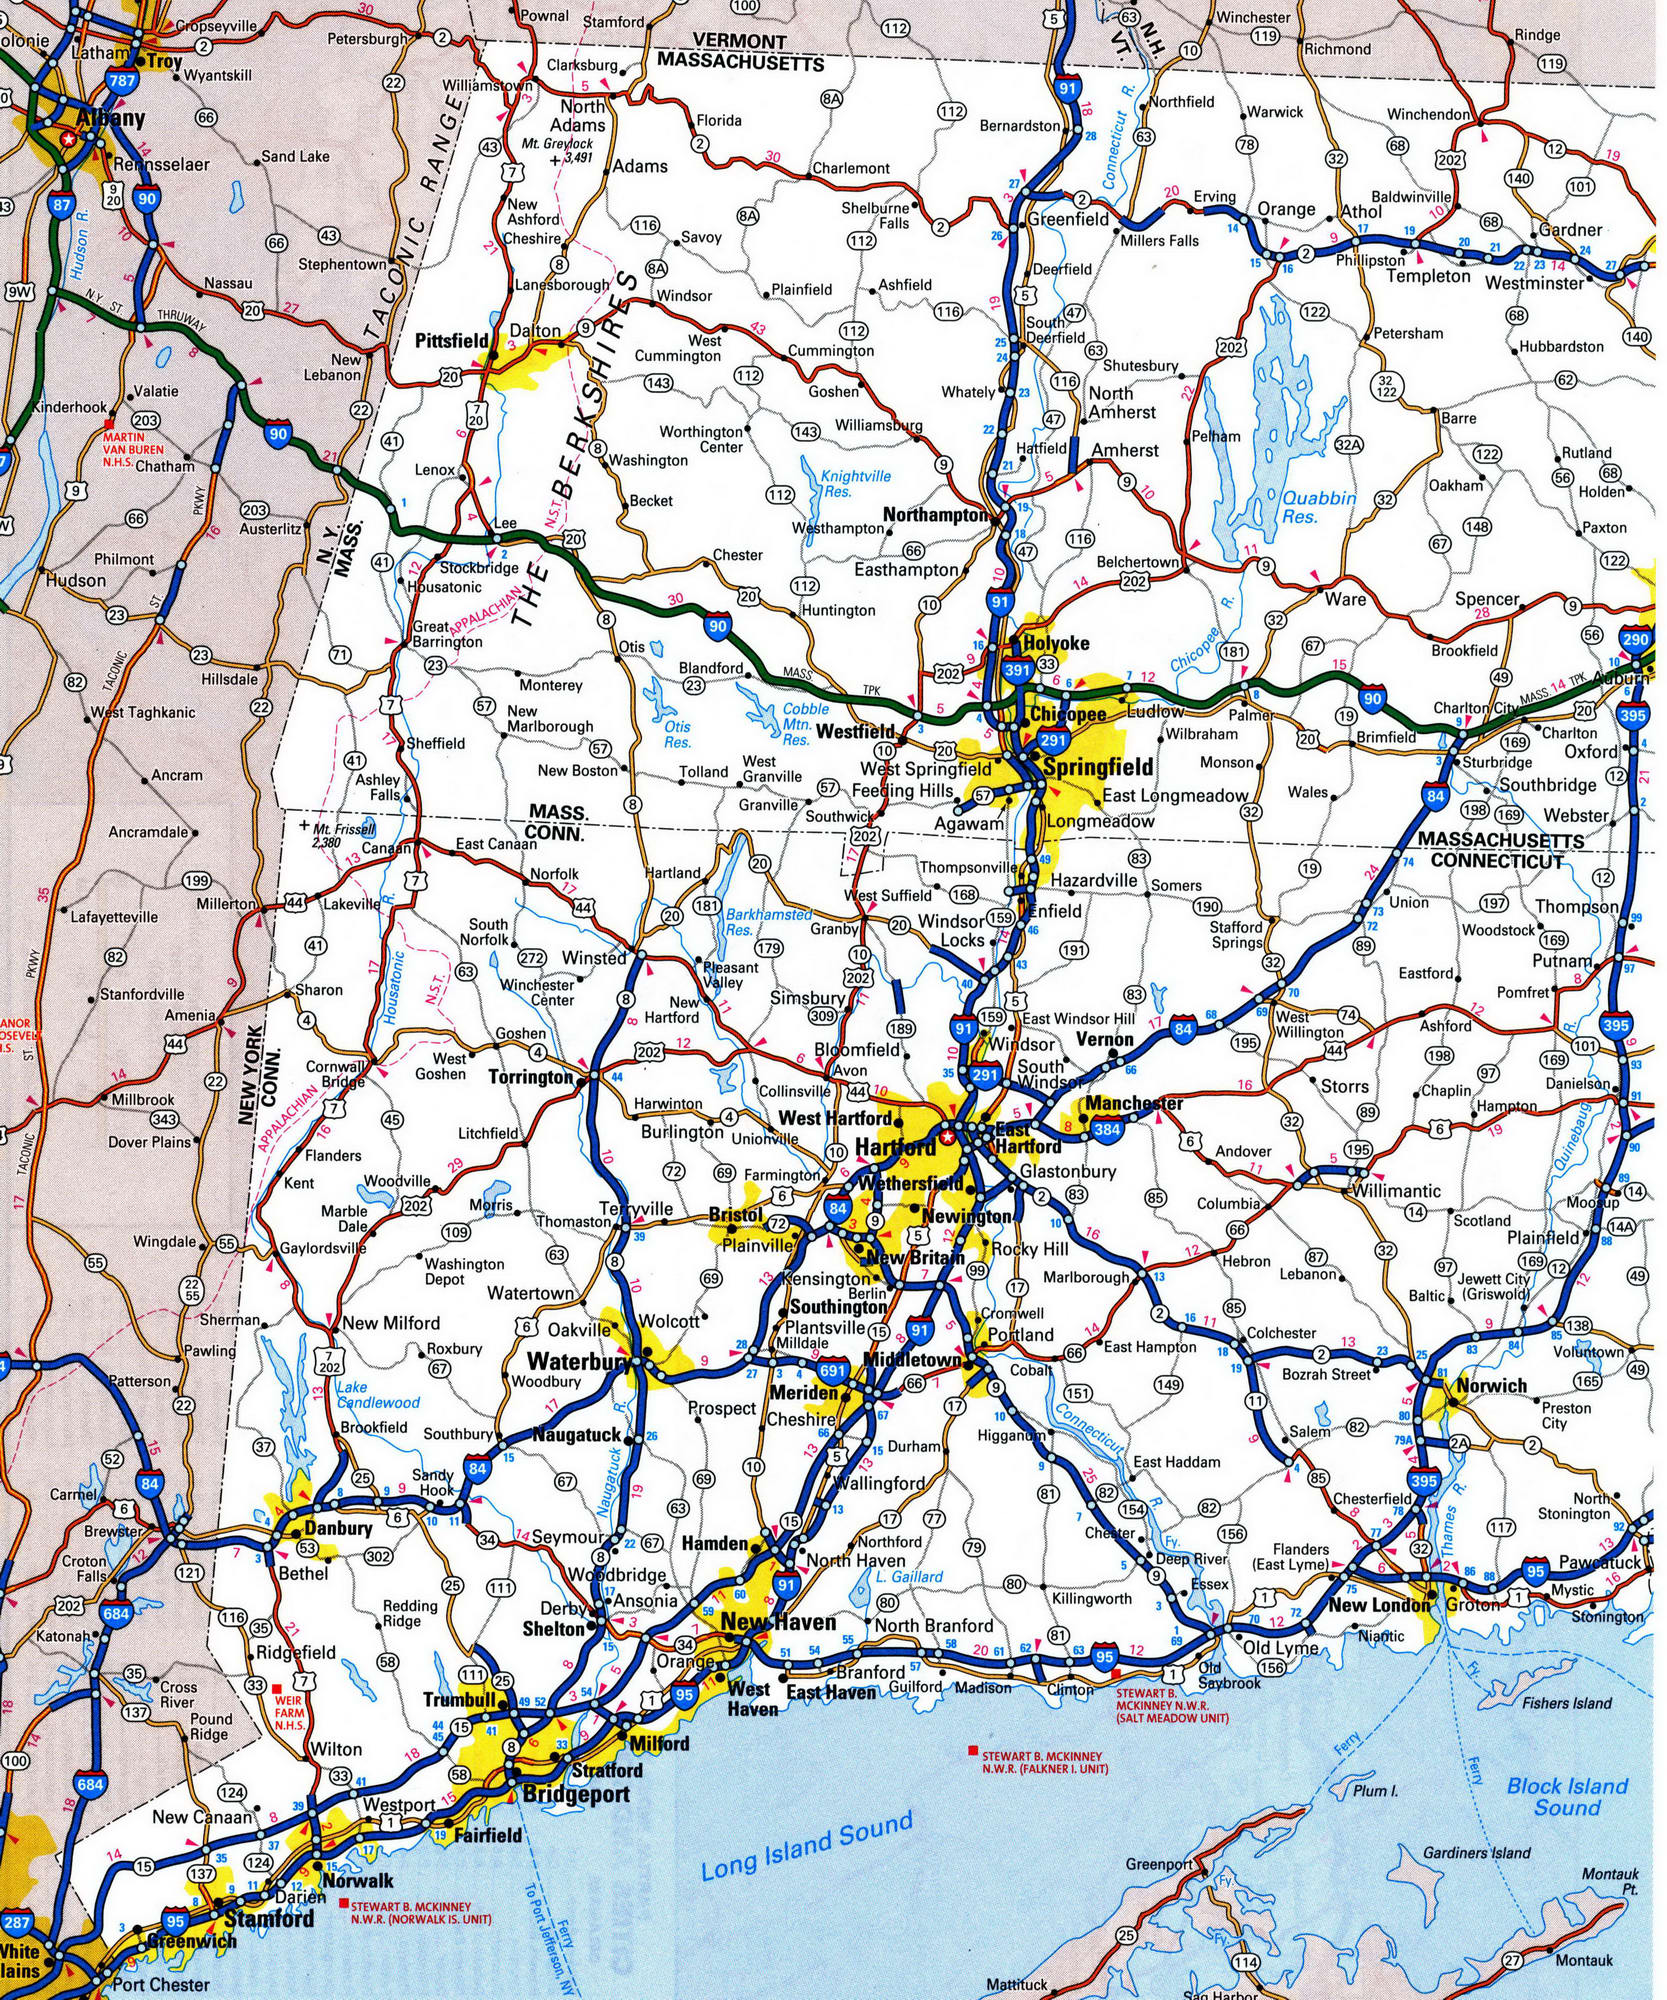 Detailed roads map of Connecticut